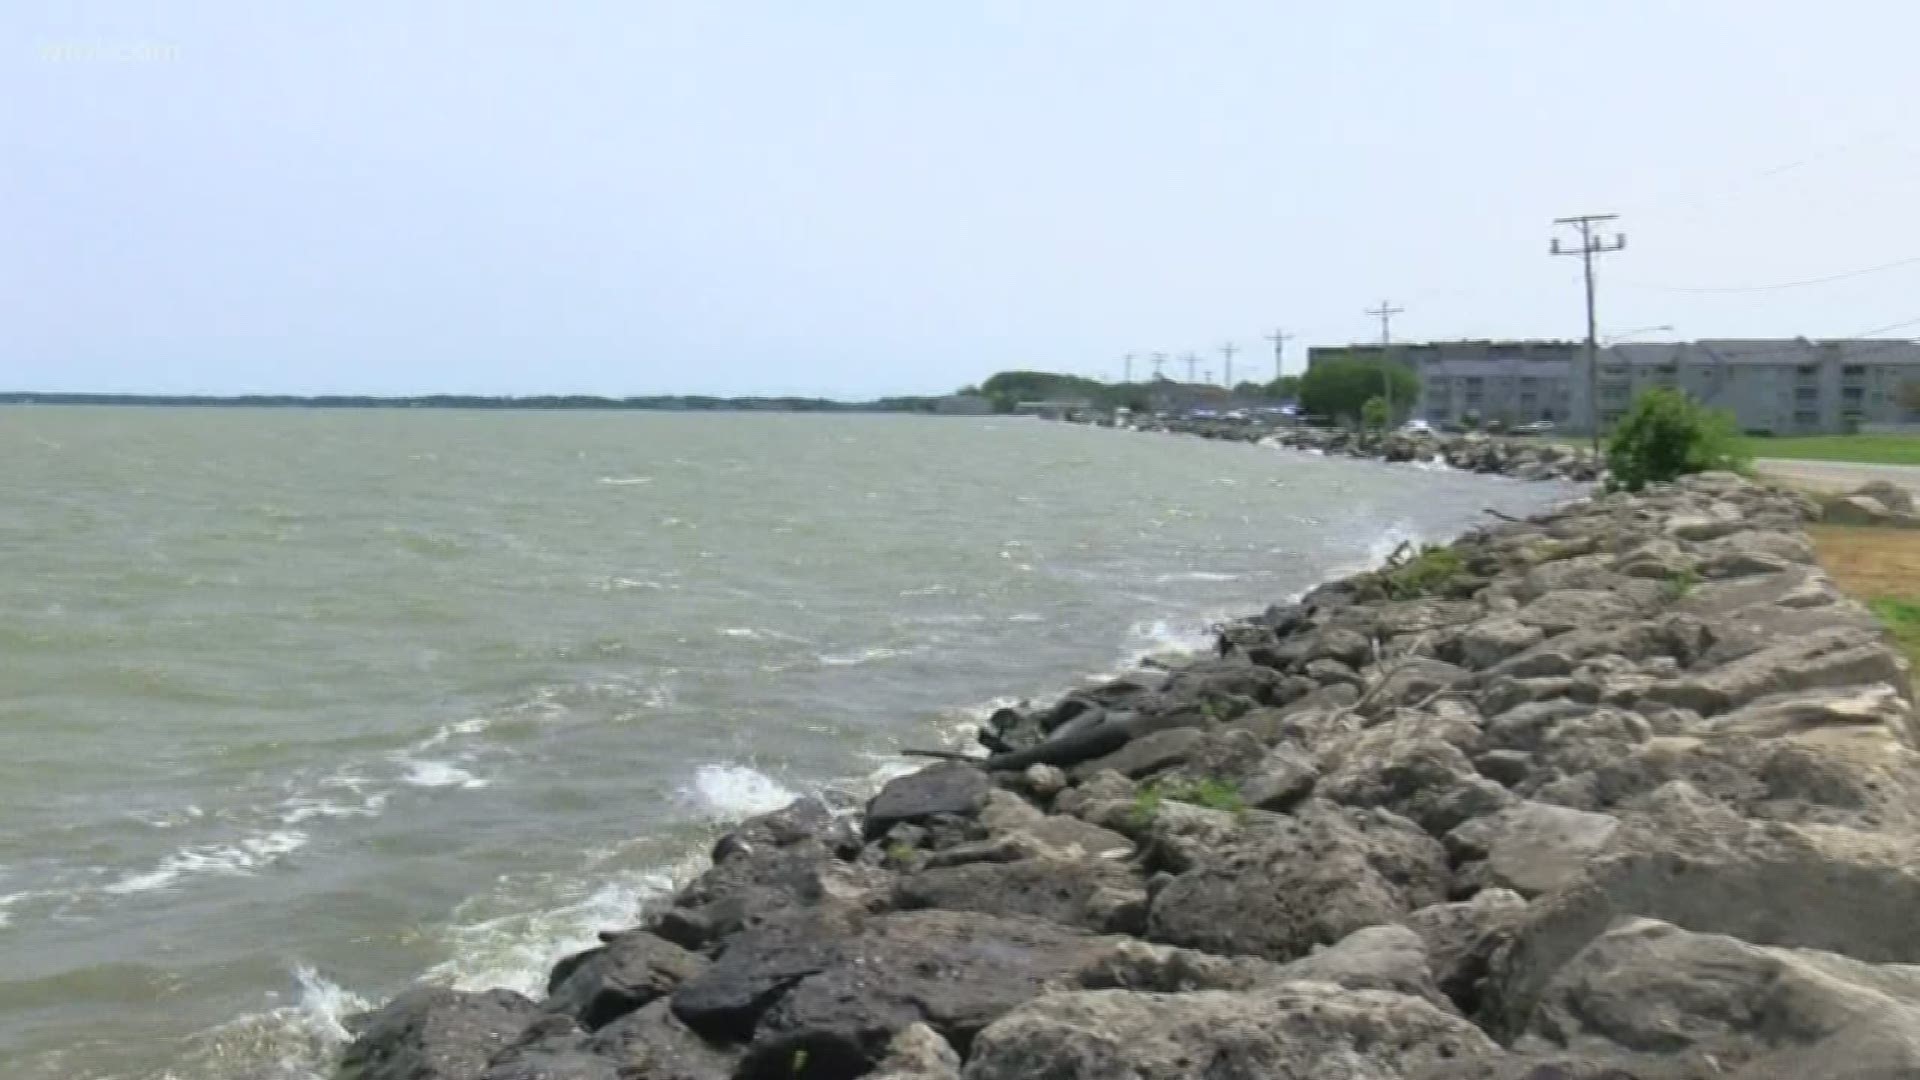 Lake Erie water levels impacting businesses and leading to roads closed.